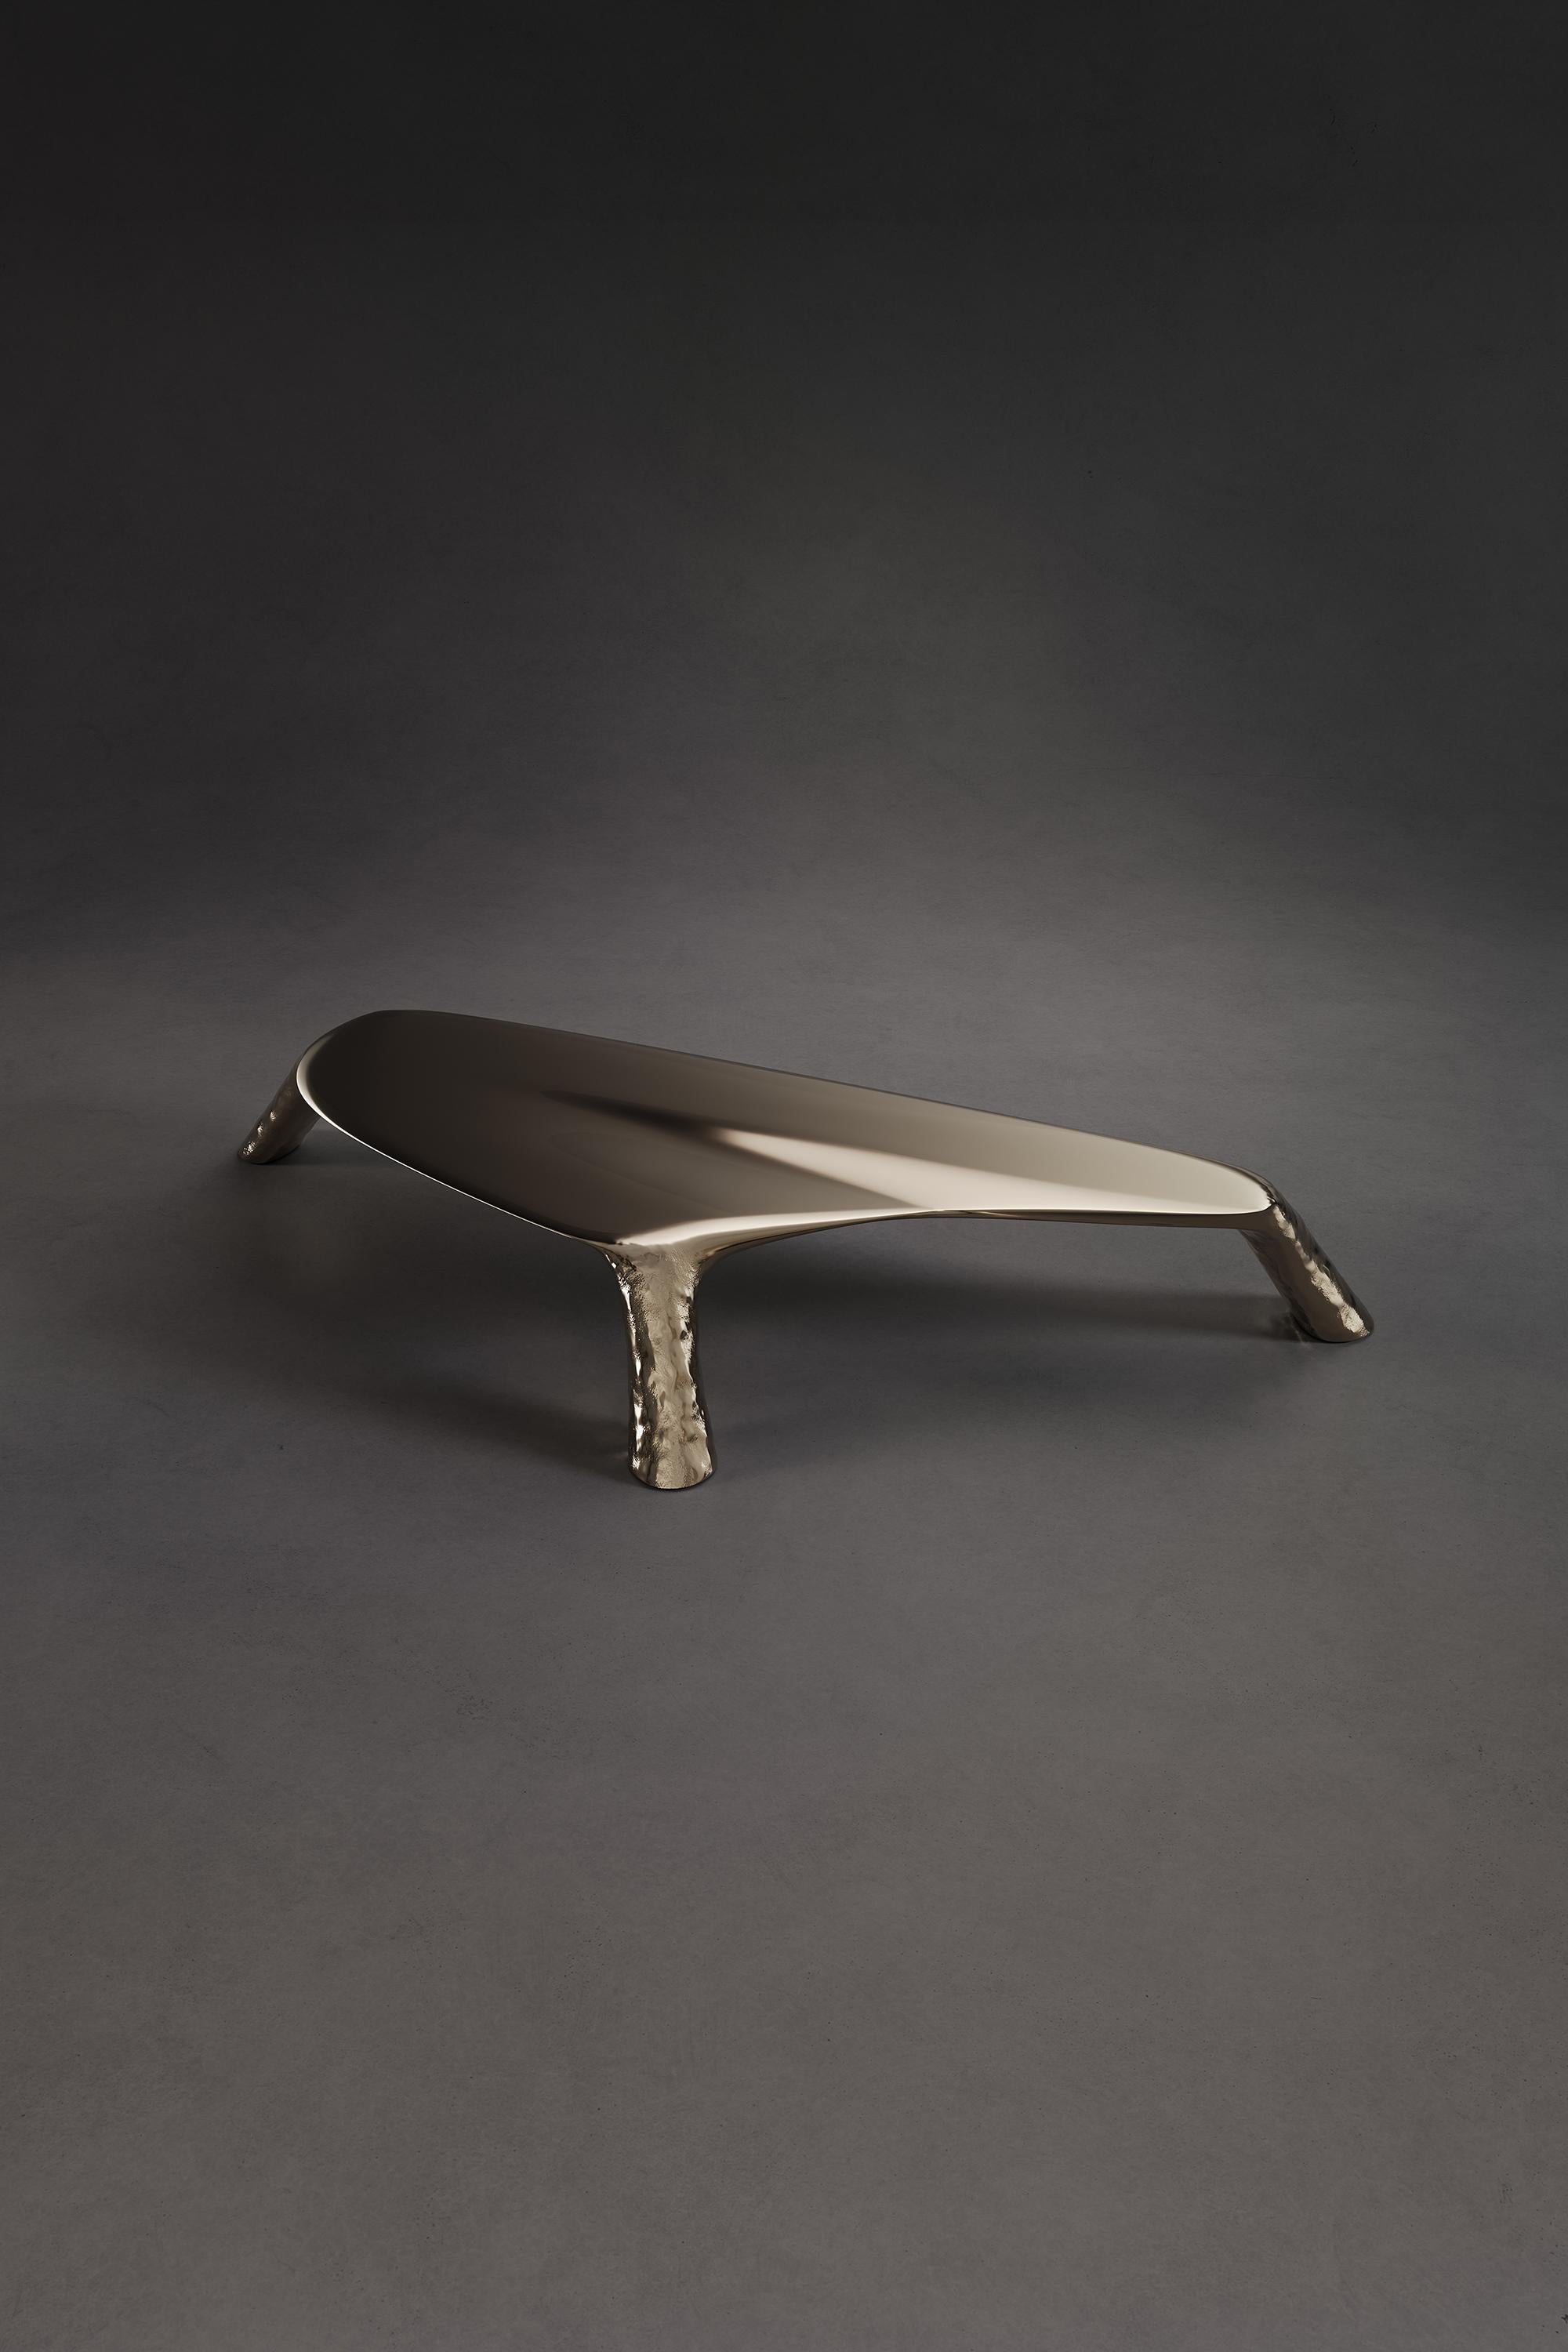 Small Merging Table by Atelier V&F
Limited Edition Of 12+2AP Pieces.
Dimensions: D 67.5 x W 153 x H 21 cm. 
Materials: Cast brass.

「Merging Tables」, a set of two coffee tables, taking its shape from the unsteady posture of newborn calves, picture